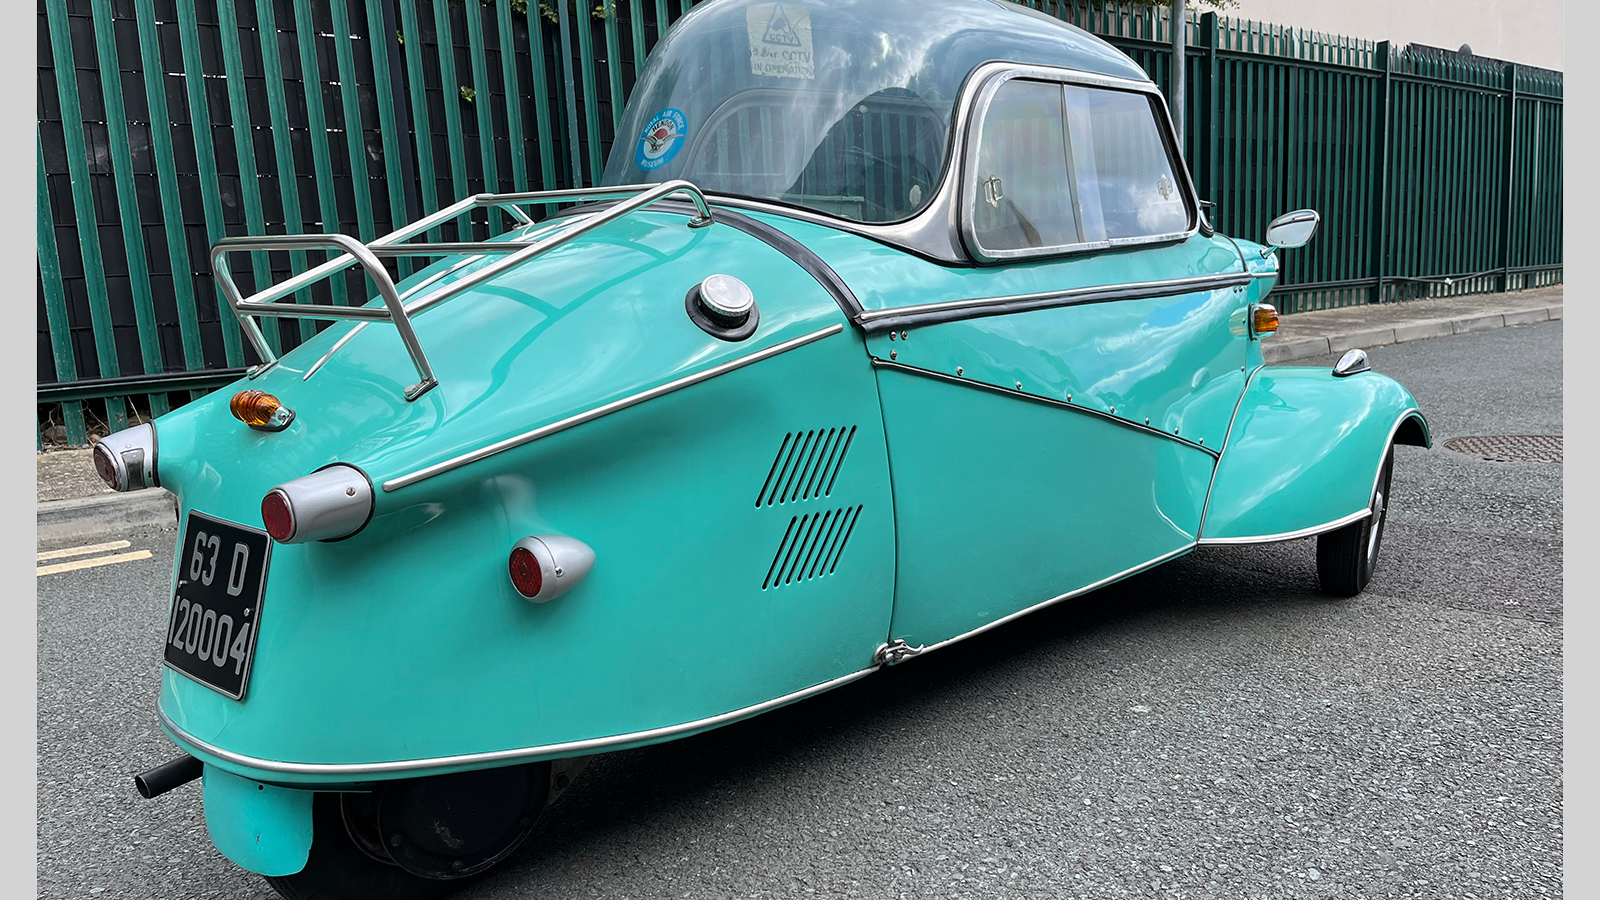 These 8 bonkers bubble cars are for sale